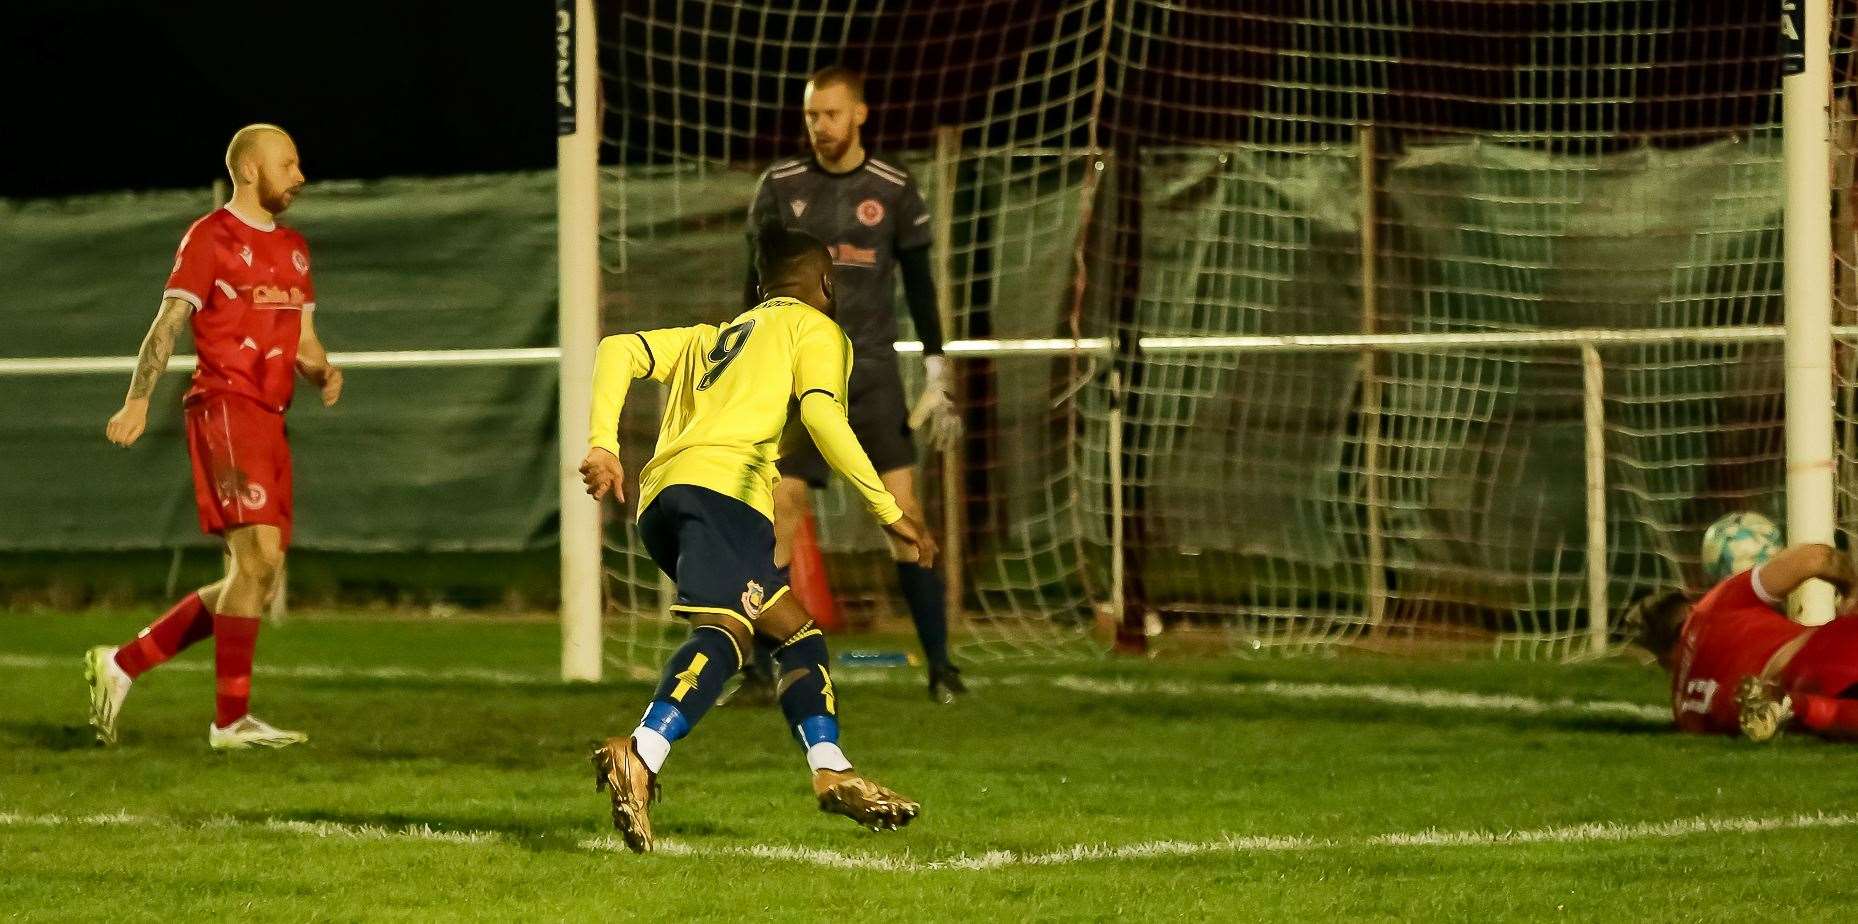 Striker Steadman Callender puts the ball just inside the post for Whitstable's second goal. Picture: Les Biggs